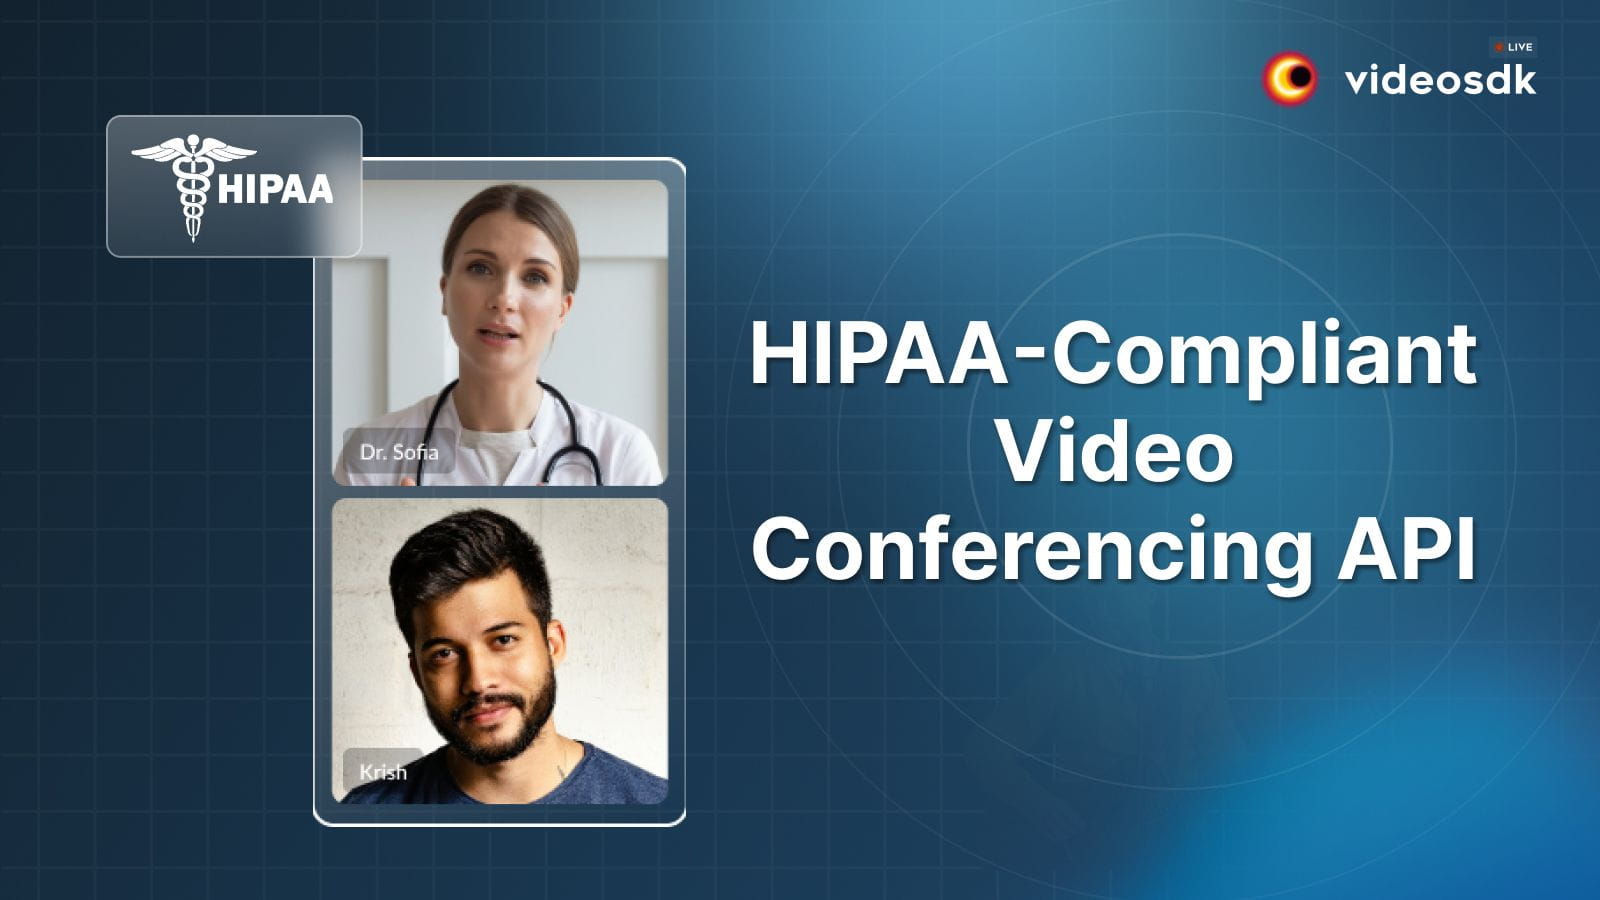 HIPAA Compliant Video Conferencing API: Complete Guide for Telehealth Video Calls In Your App